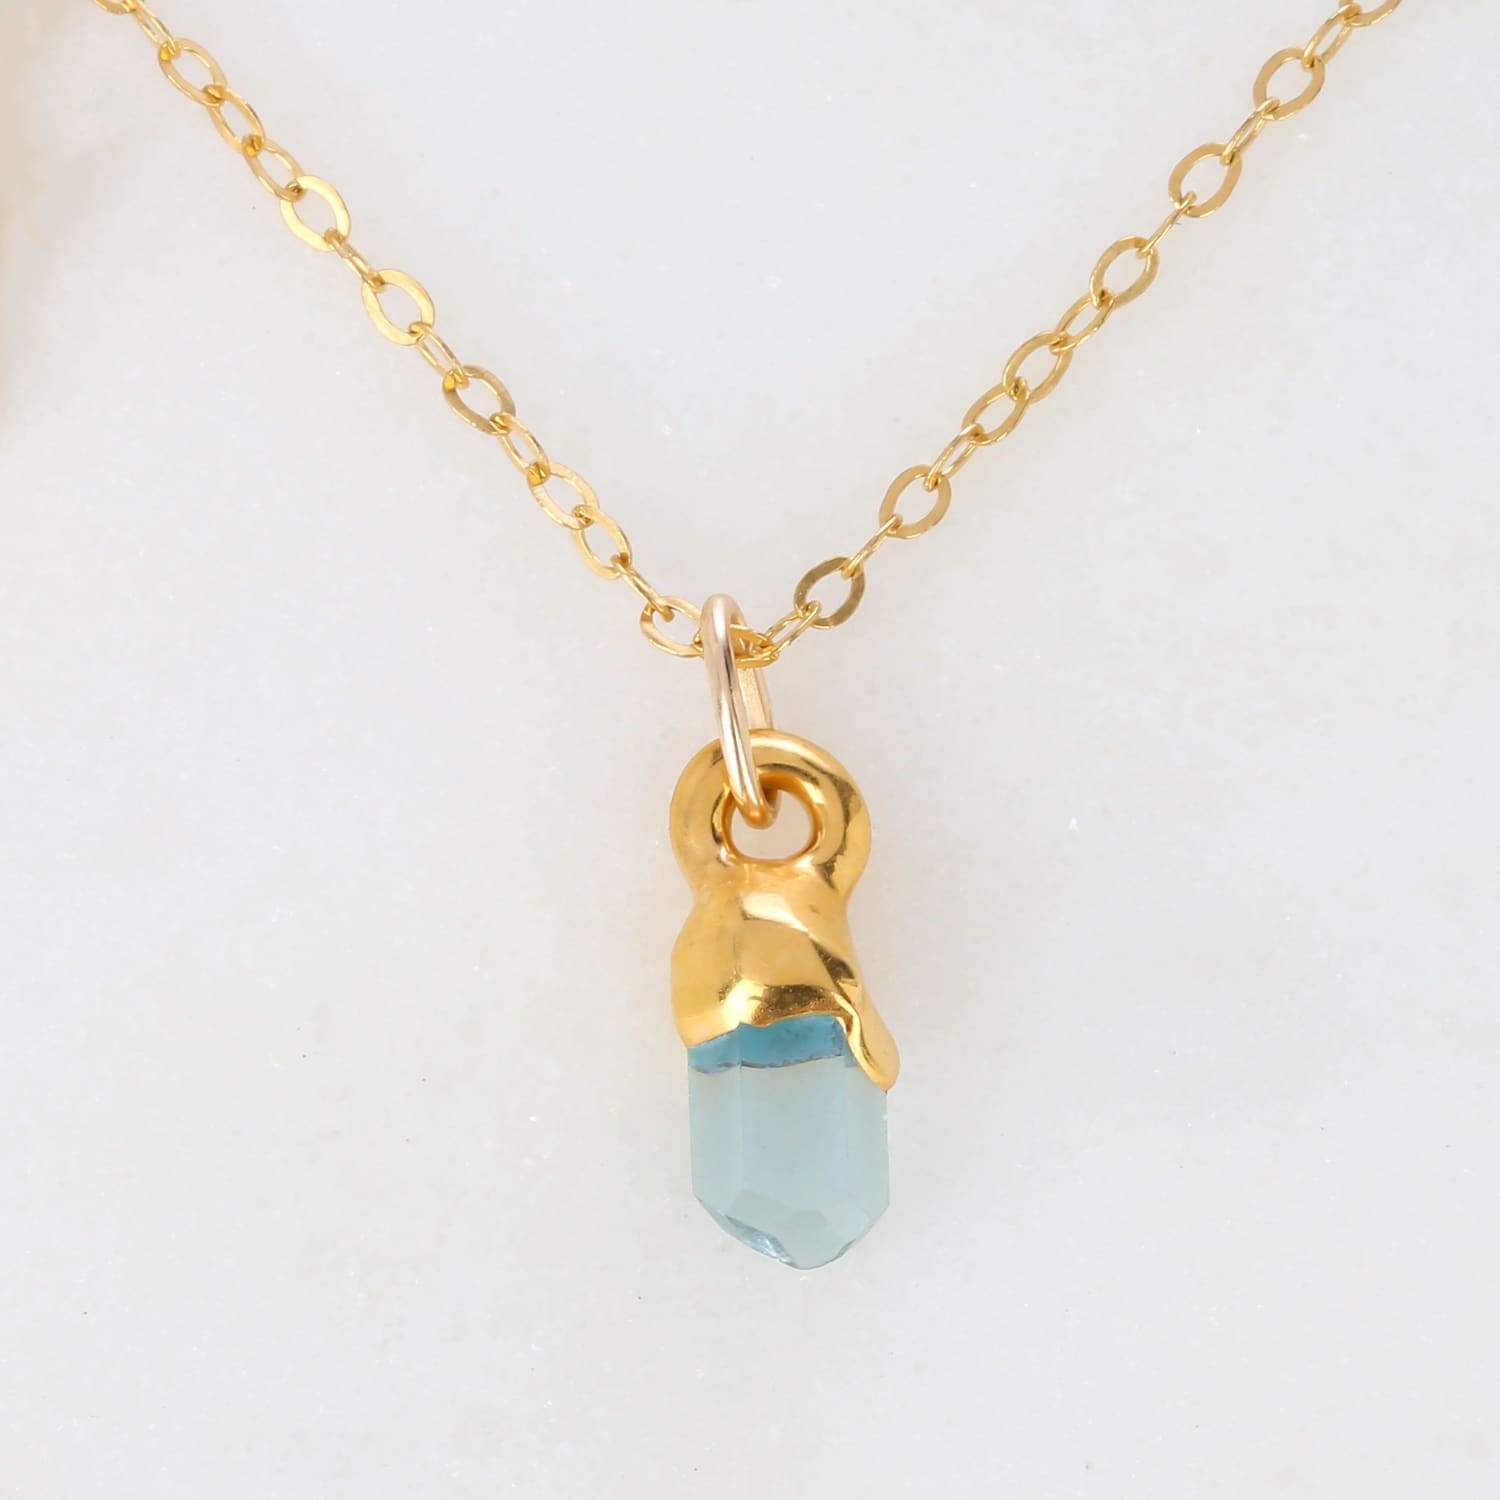 Onlynery Raw Aquamarine Necklaces for Women - Real Rough Stone Crystal Jade  Necklaces for Women, Blue Aquamarine Pendant with Rope, March Birthstone  Jewellery Gift for Women : Amazon.co.uk: Fashion